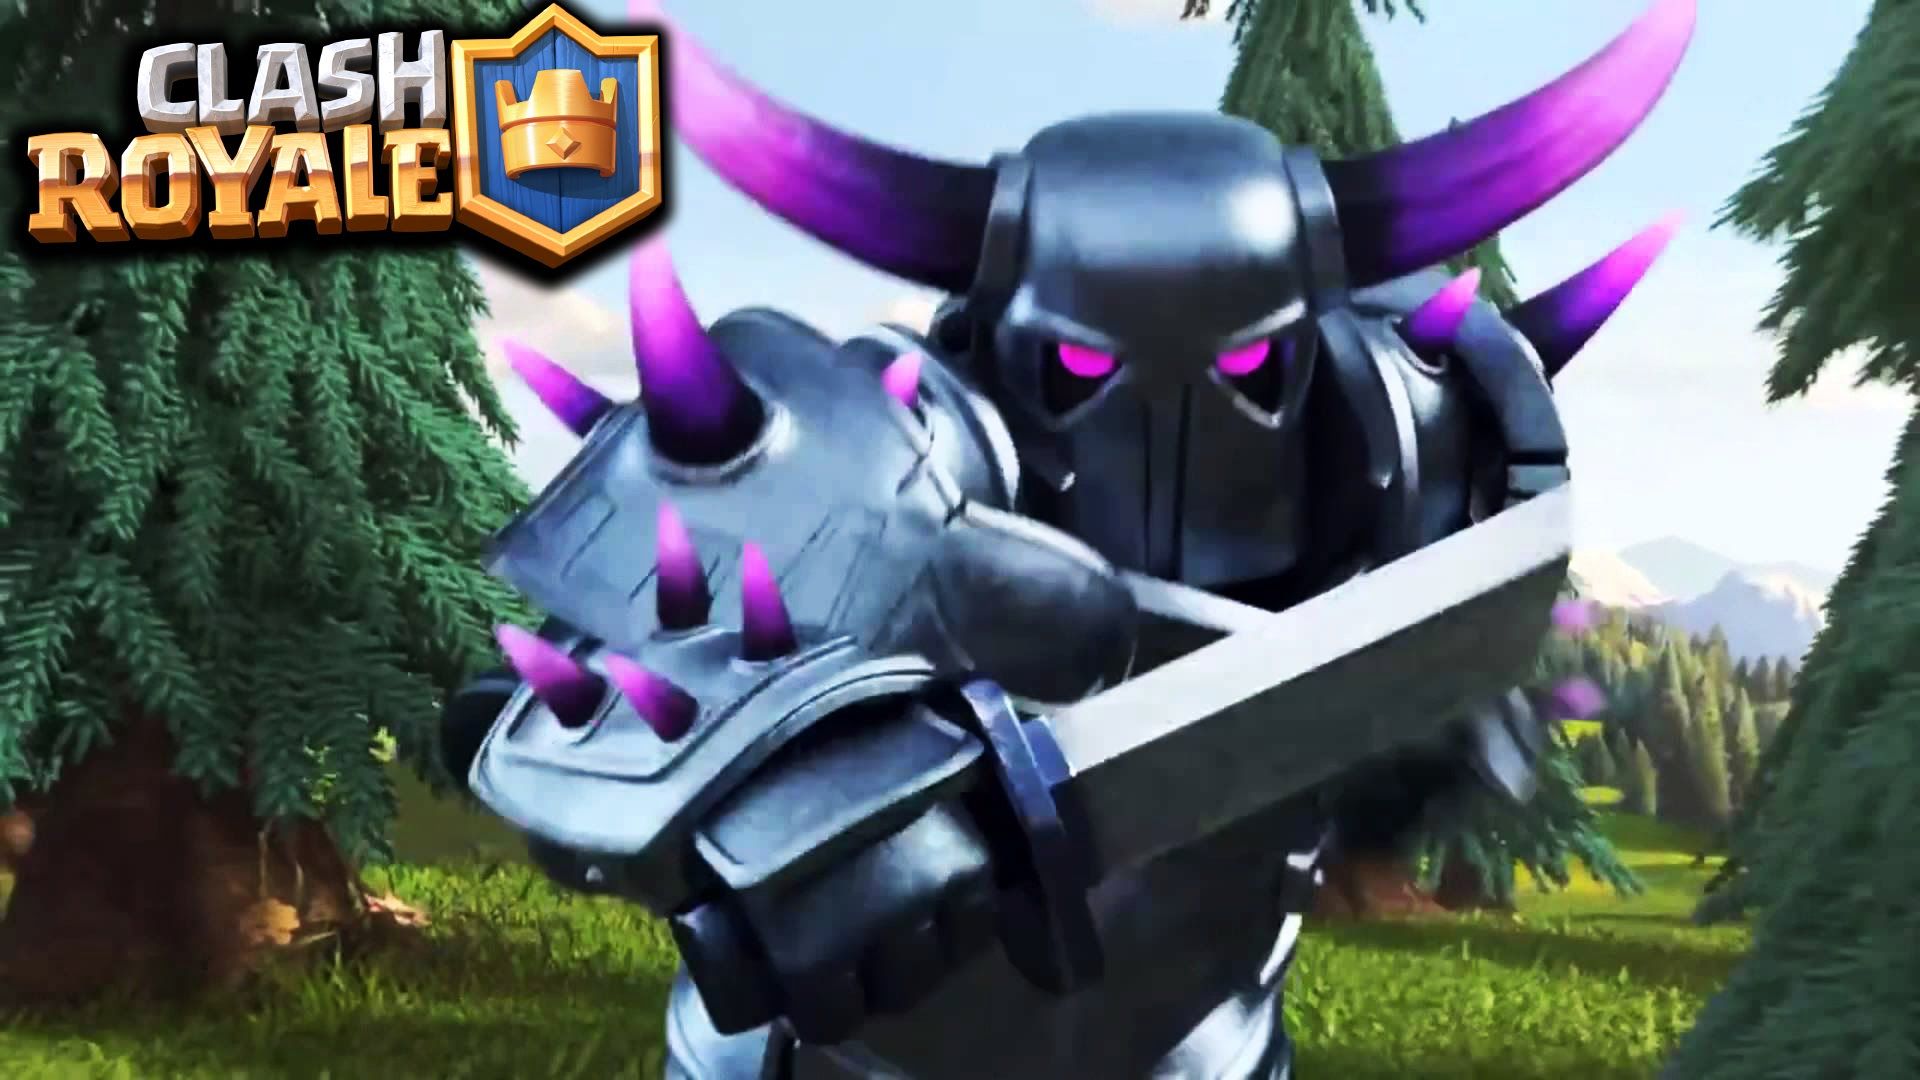 Clash Royale HD Wallpaper for PHONE USERS Clash Royale Art 1920x1080